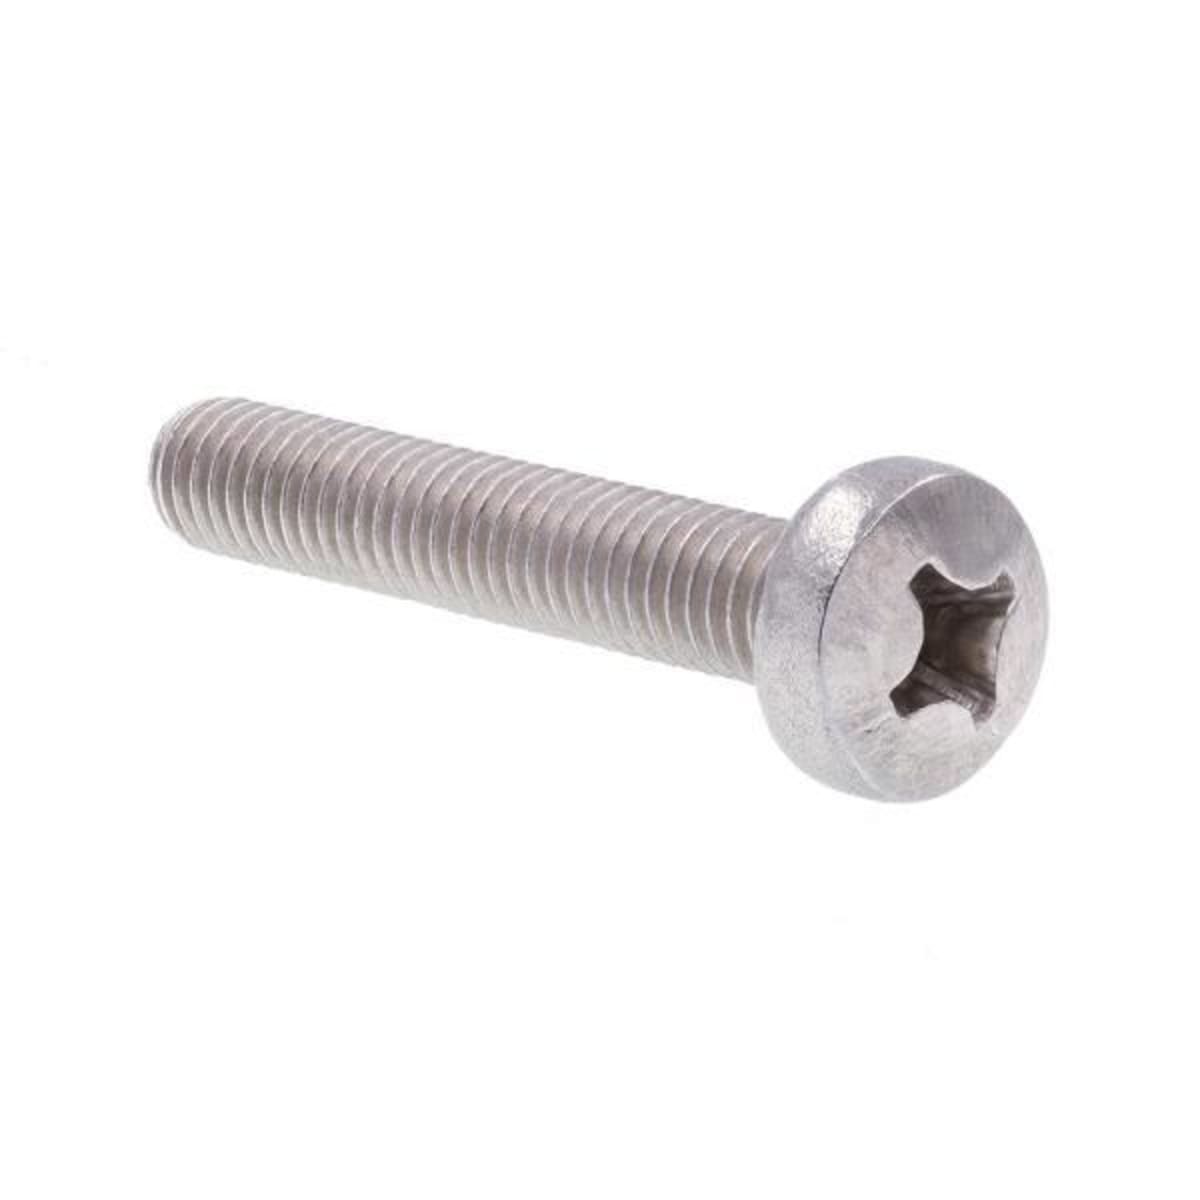 Sheet Metal Screws Stainless Steel Phillips Oval Head #8 x 7/8" Qty 250 